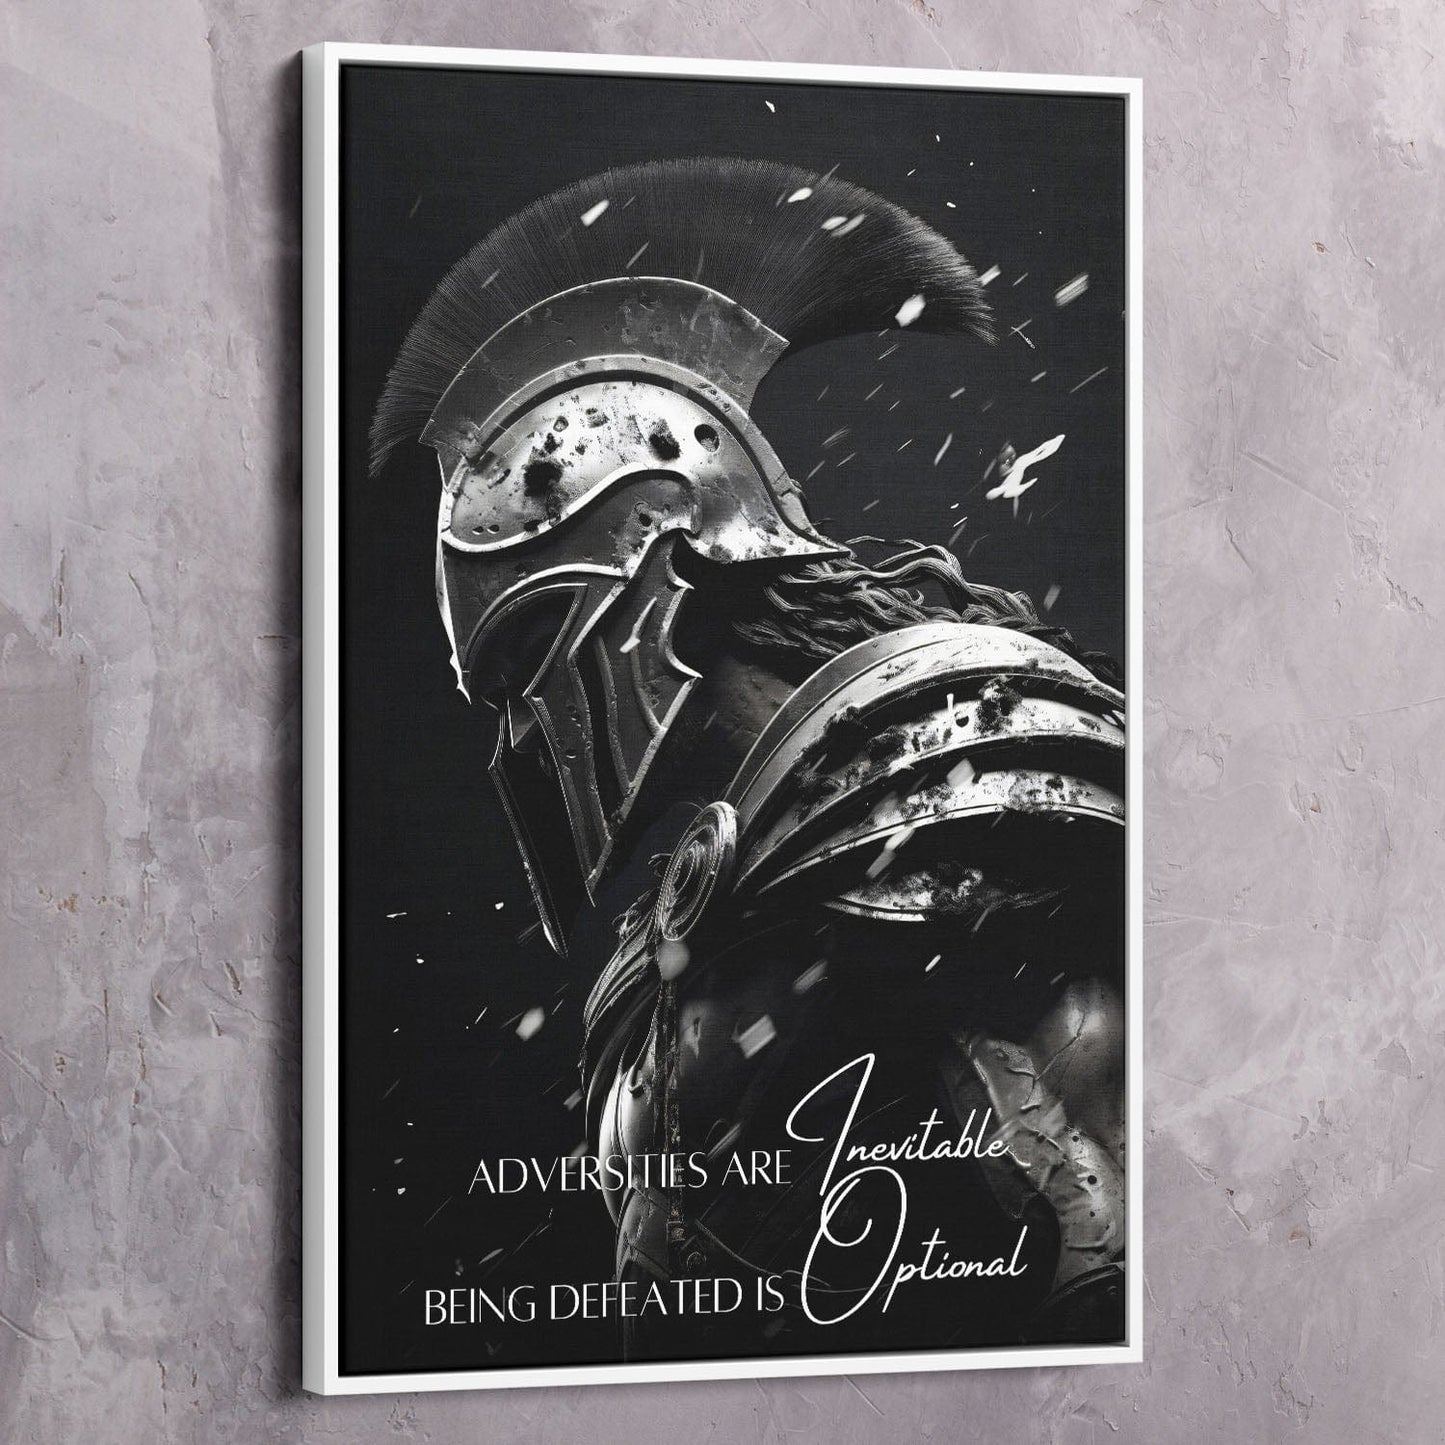 Spartan Warrior - Adversities are inevitable. Being defeated is optional. Quote Wall Art | Inspirational Wall Art Motivational Wall Art Quotes Office Art | ImpaktMaker Exclusive Canvas Art Portrait